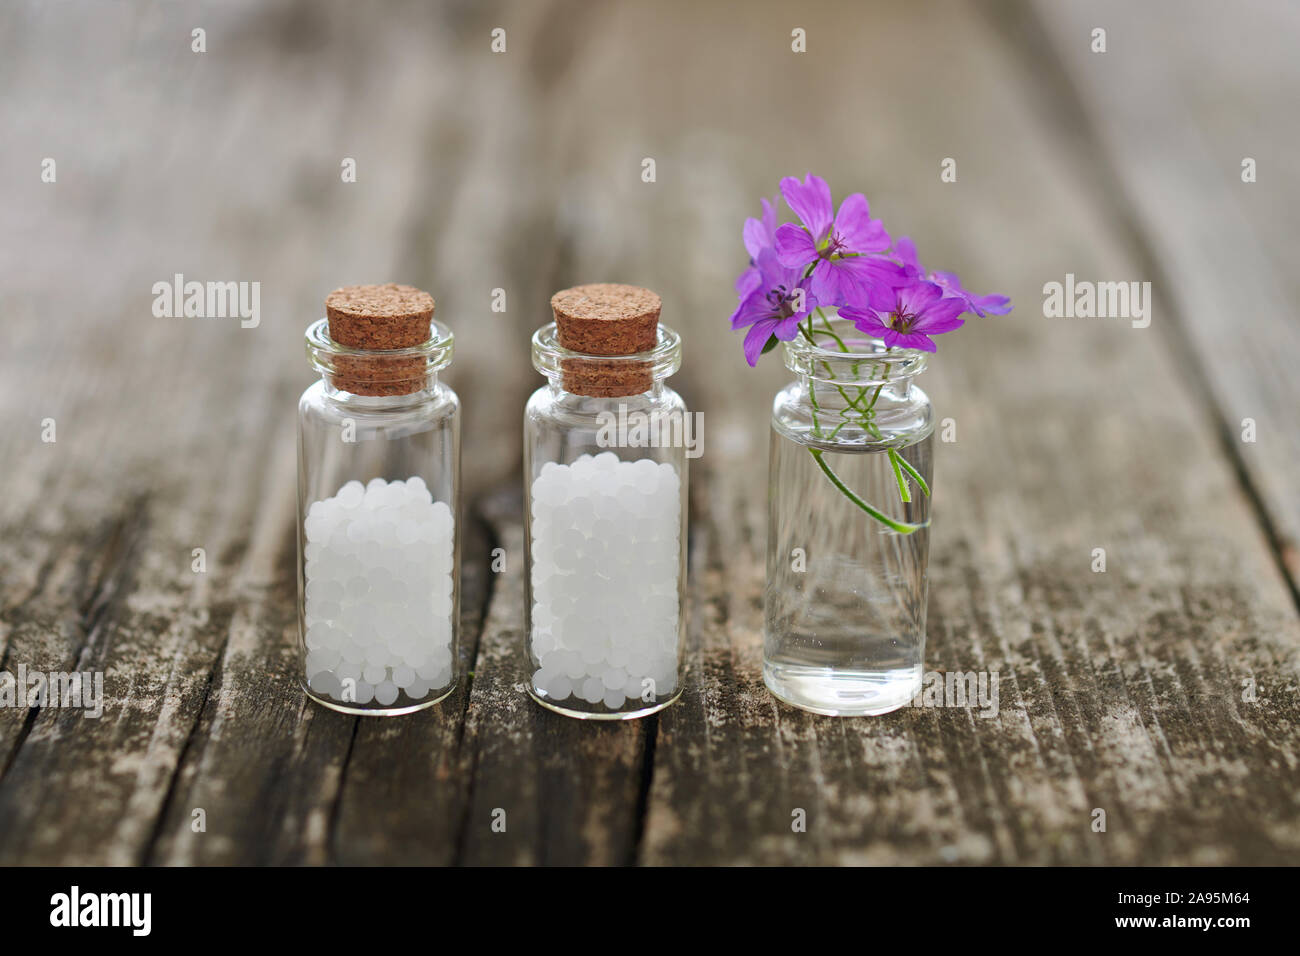 Homeopathic granules in small glass flasks and small pink flowers. Stock Photo